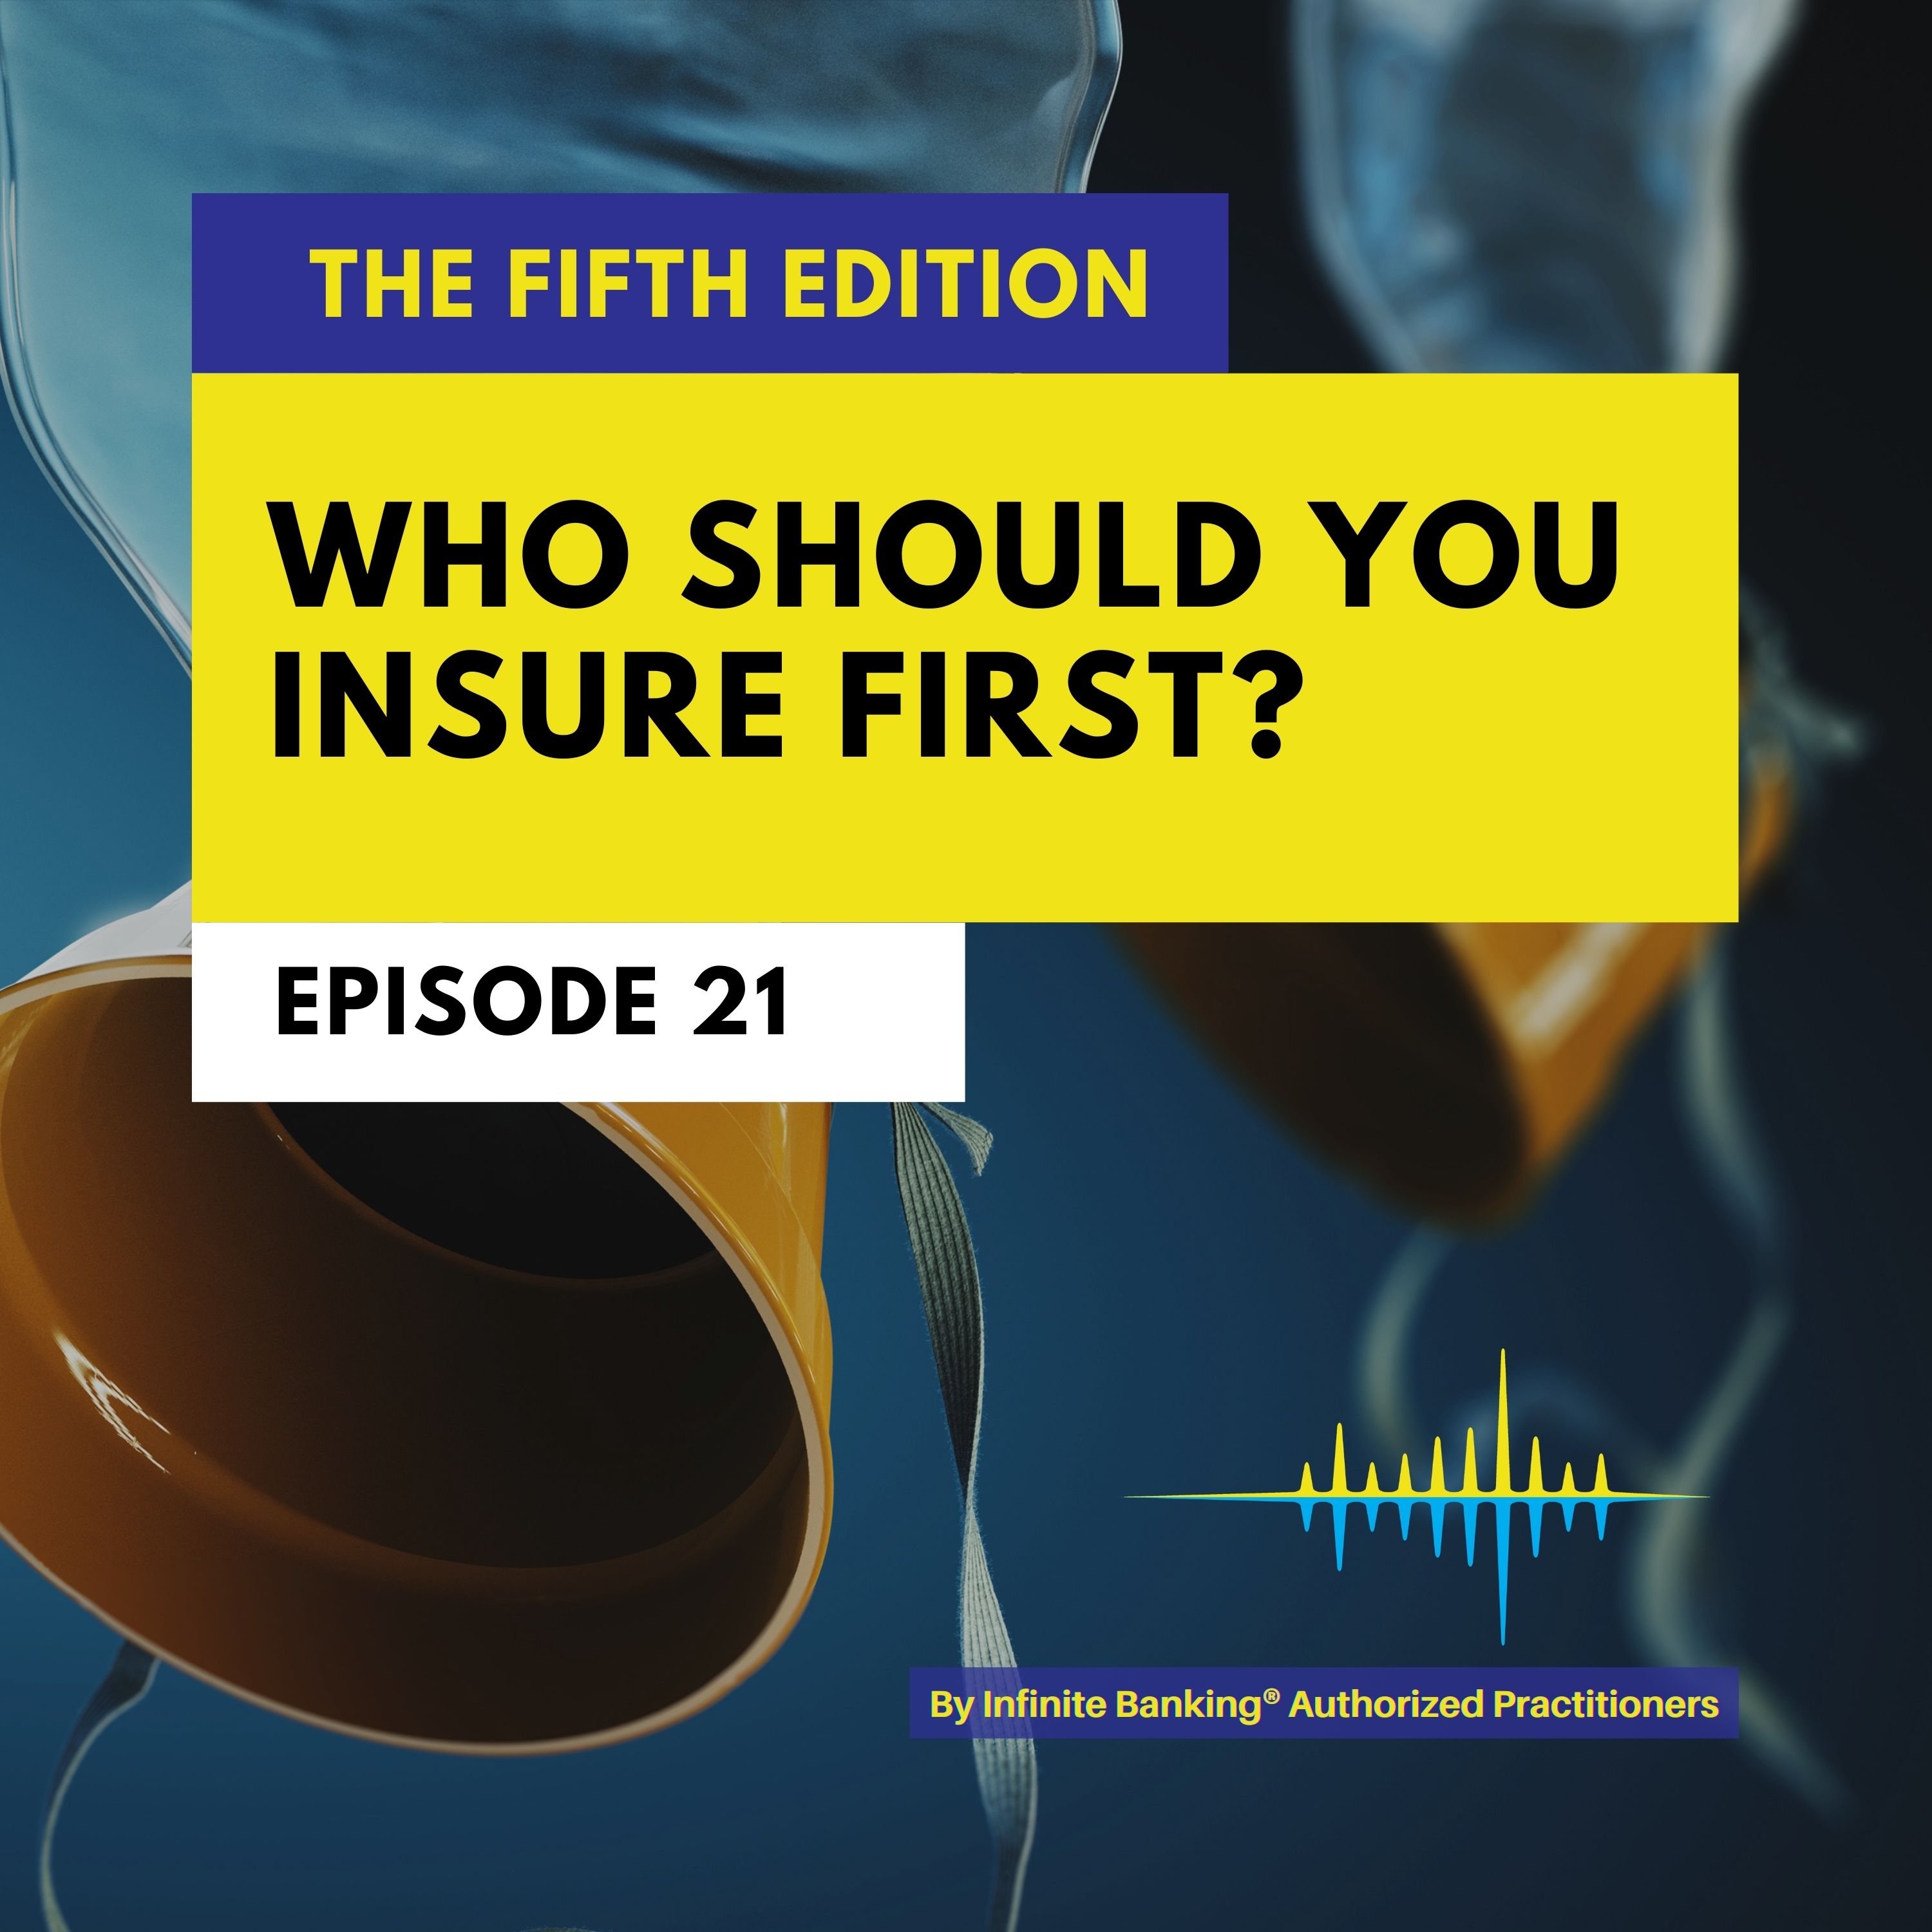 Who Should You Insure First?